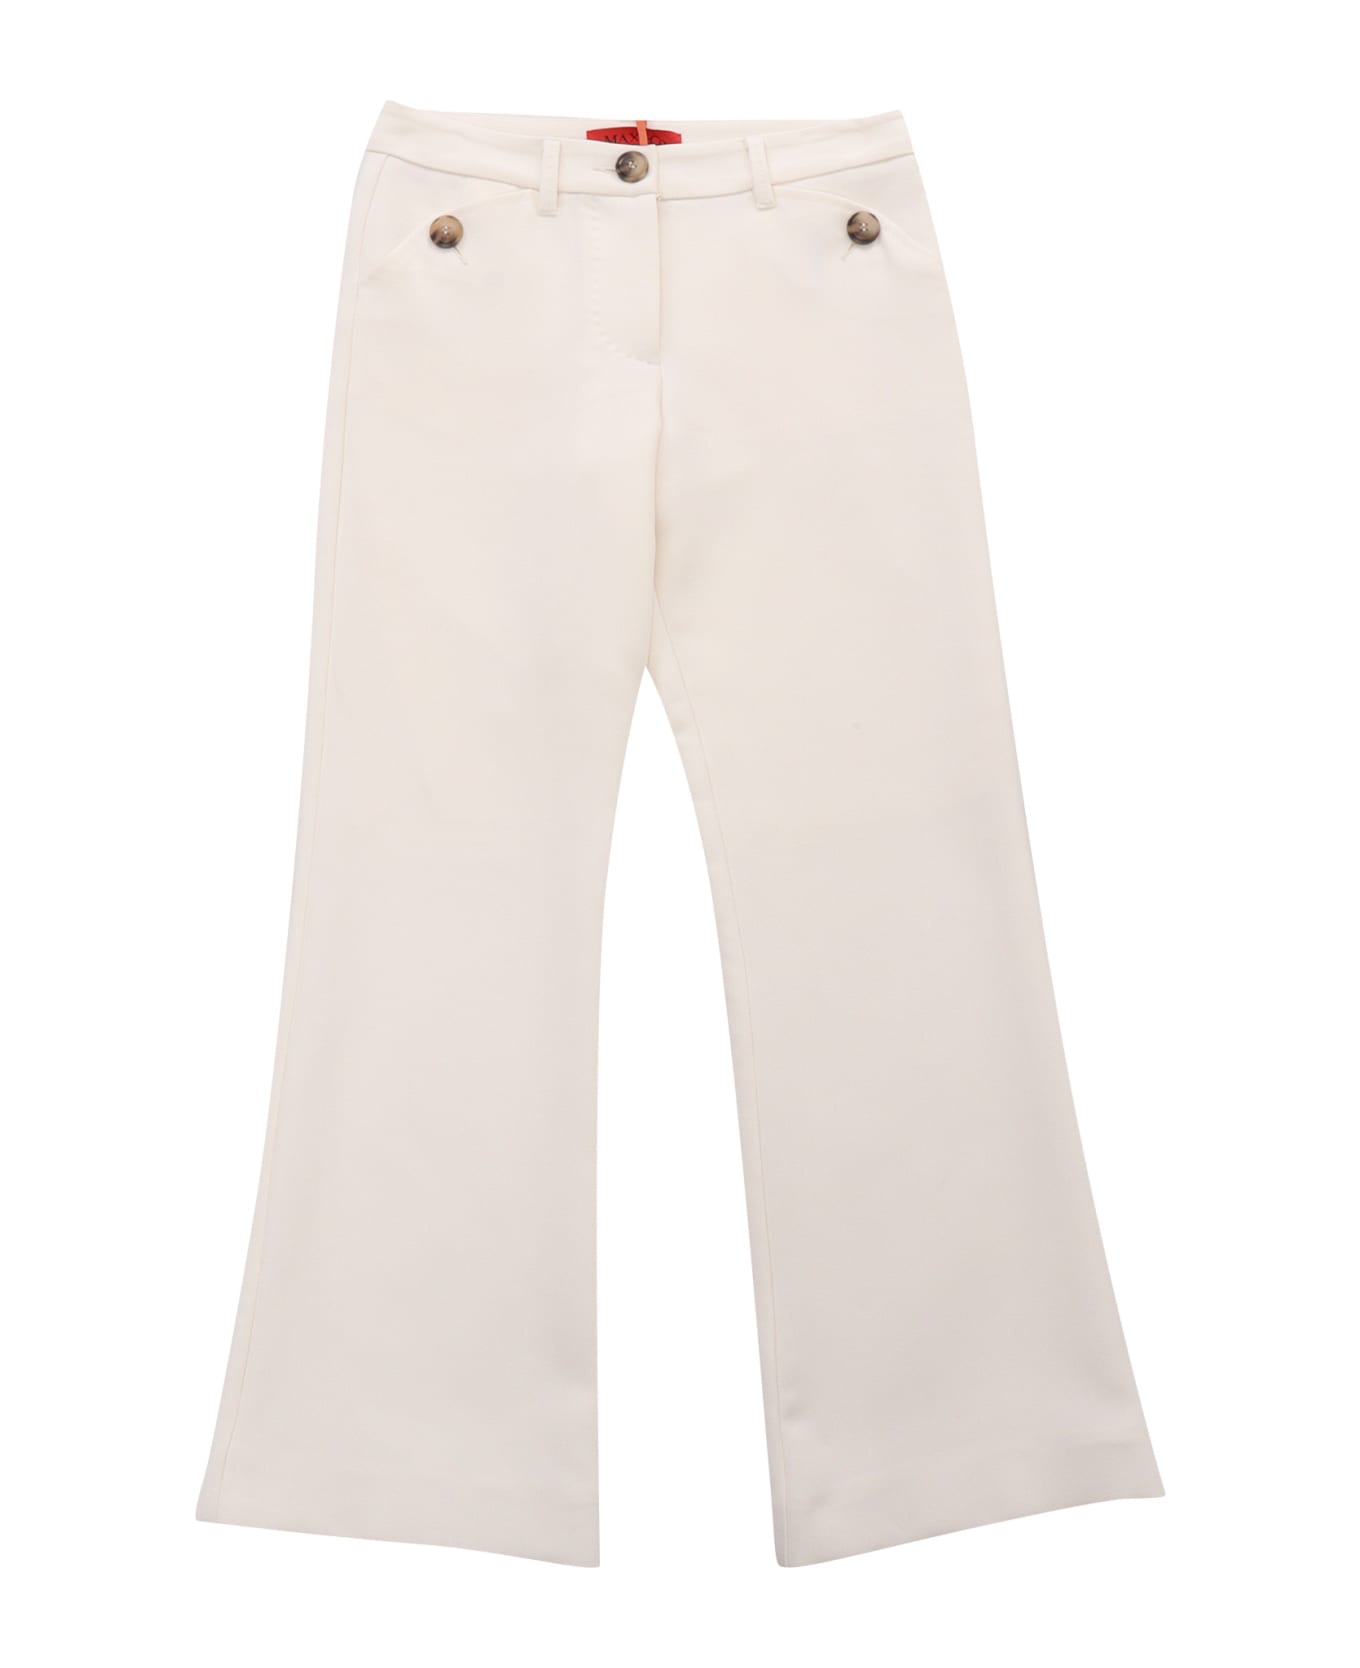 Max&Co. Flared Trousers - WHITE